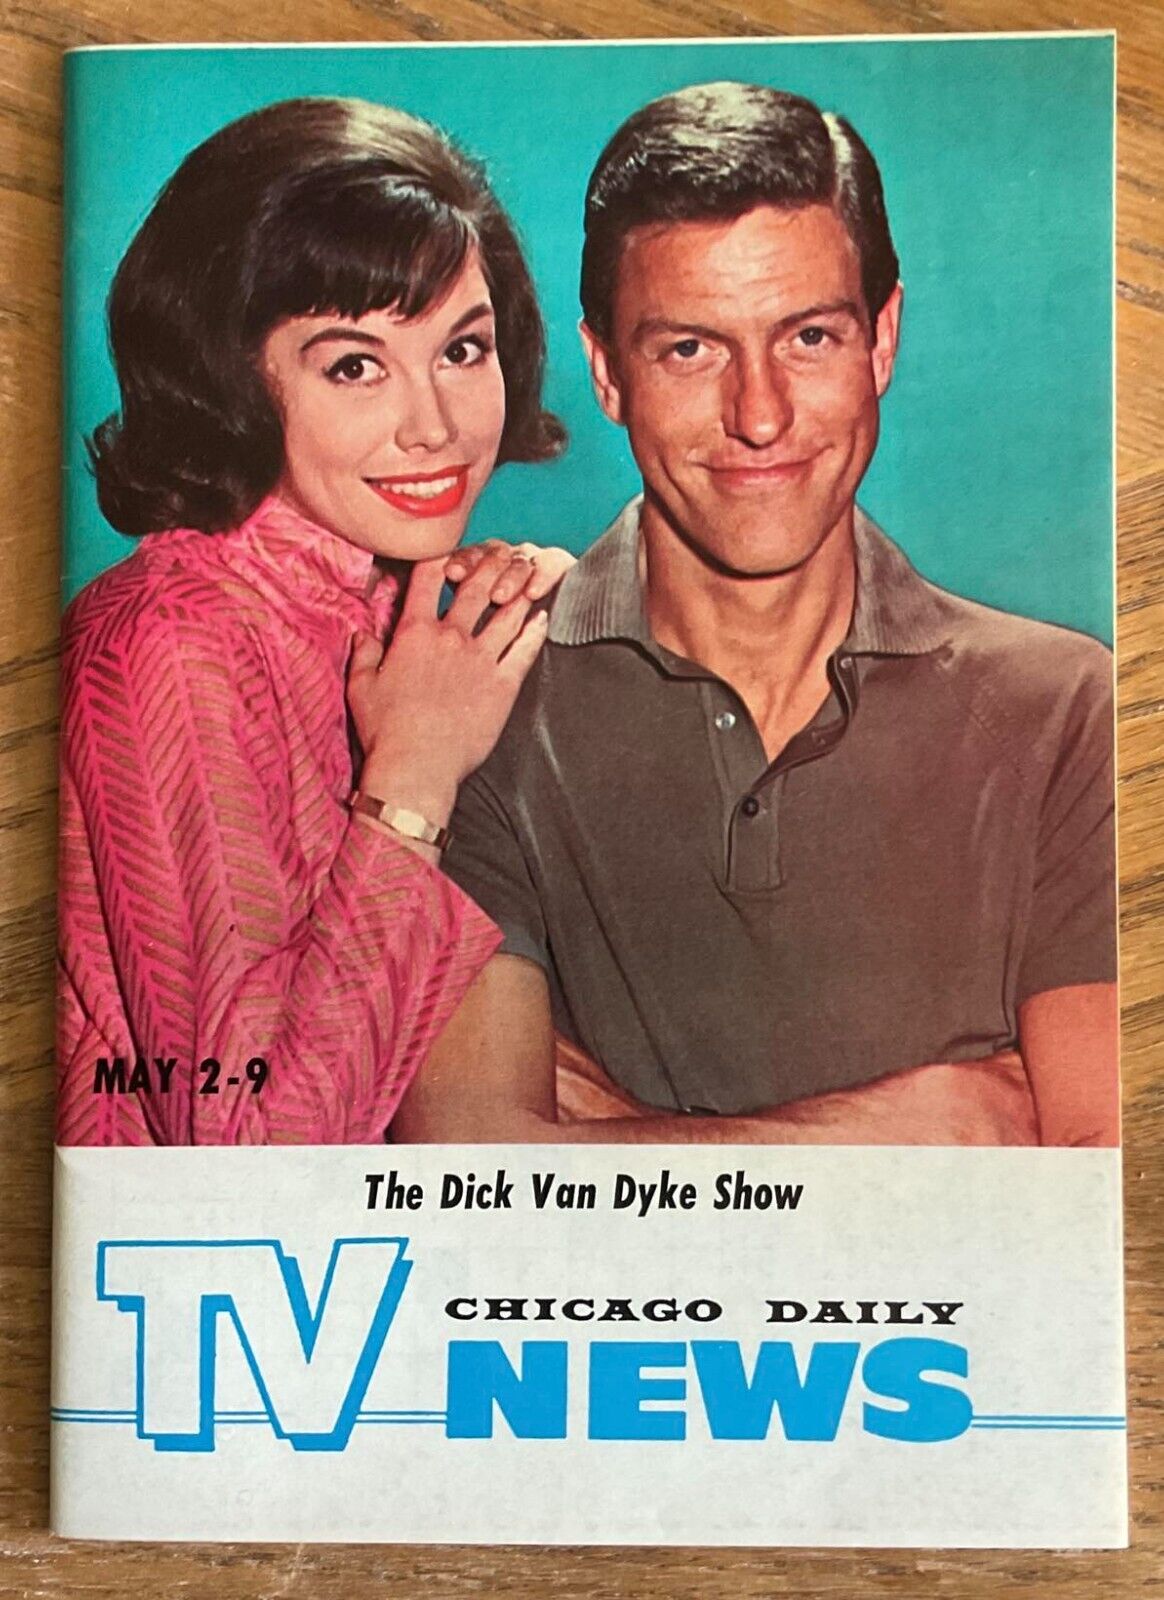 May 2-9 1964 Chicago Daily TV News Mag With Dick Van Dyke & Mary Tyler Moore